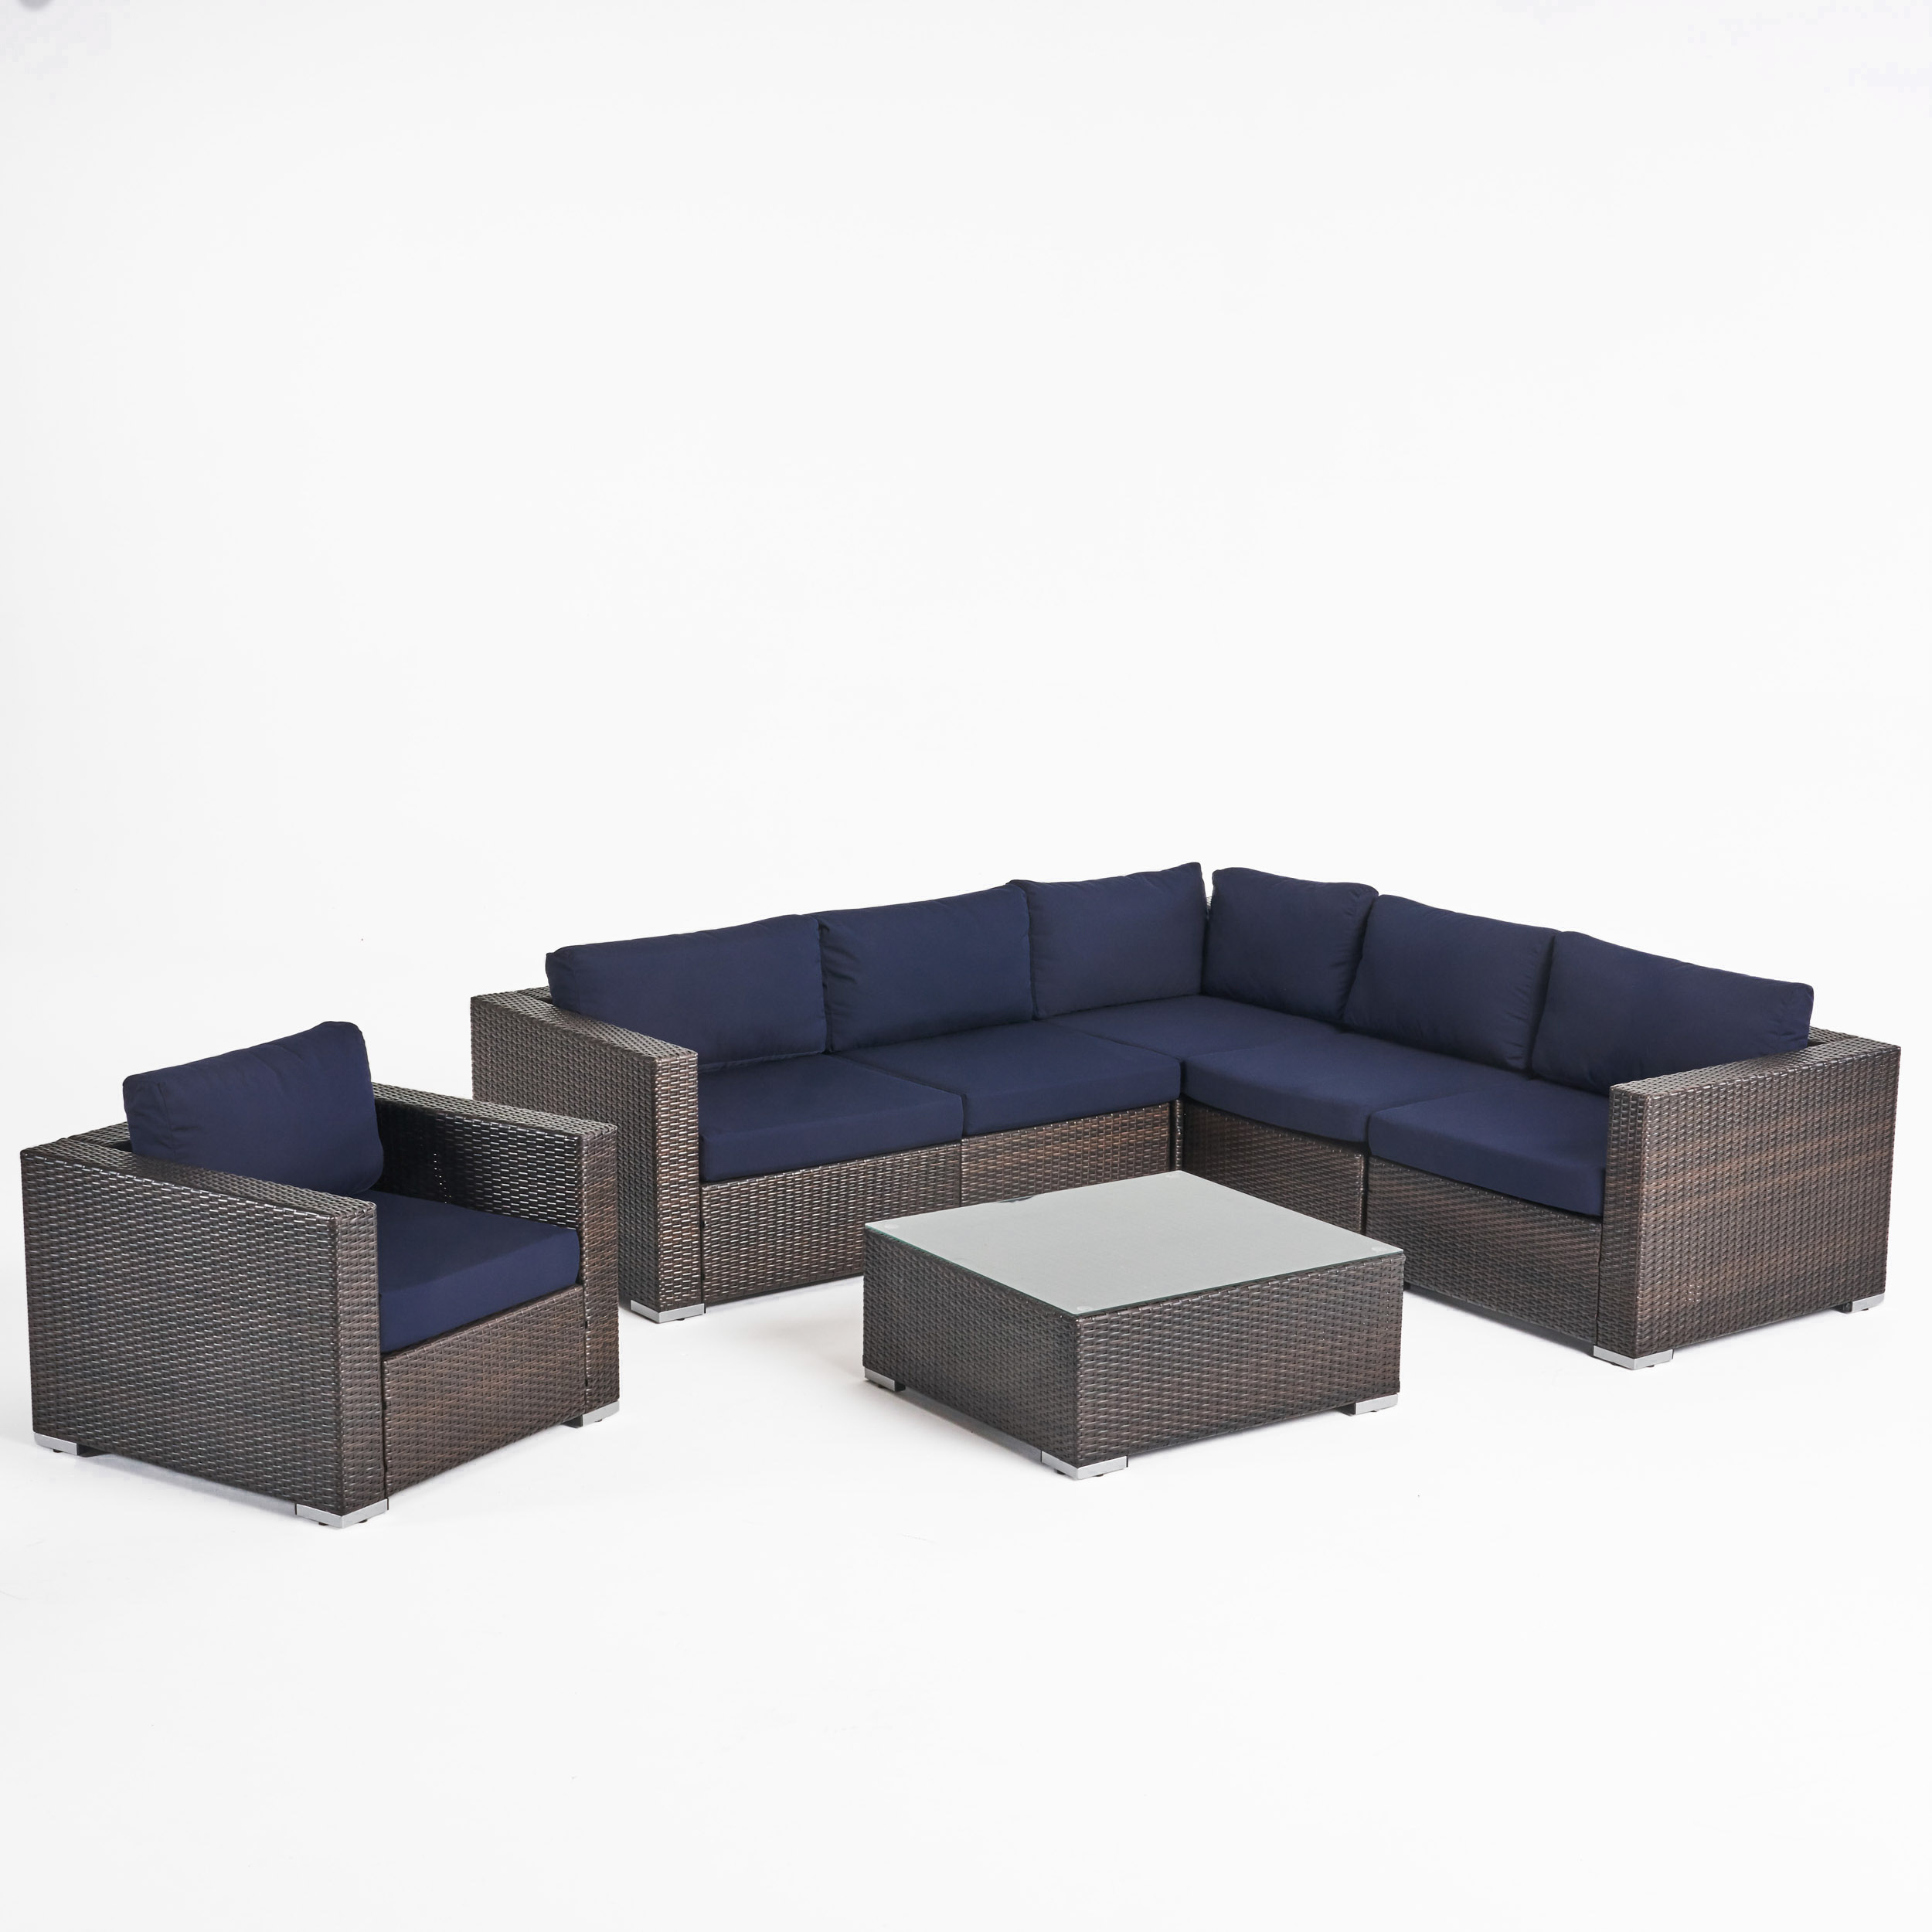 Faviola Outdoor 6 Seater Wicker Sectional Sofa Set with Sunbrella Cushions, Multibrown and Sunbrella Canvas Navy - image 4 of 10